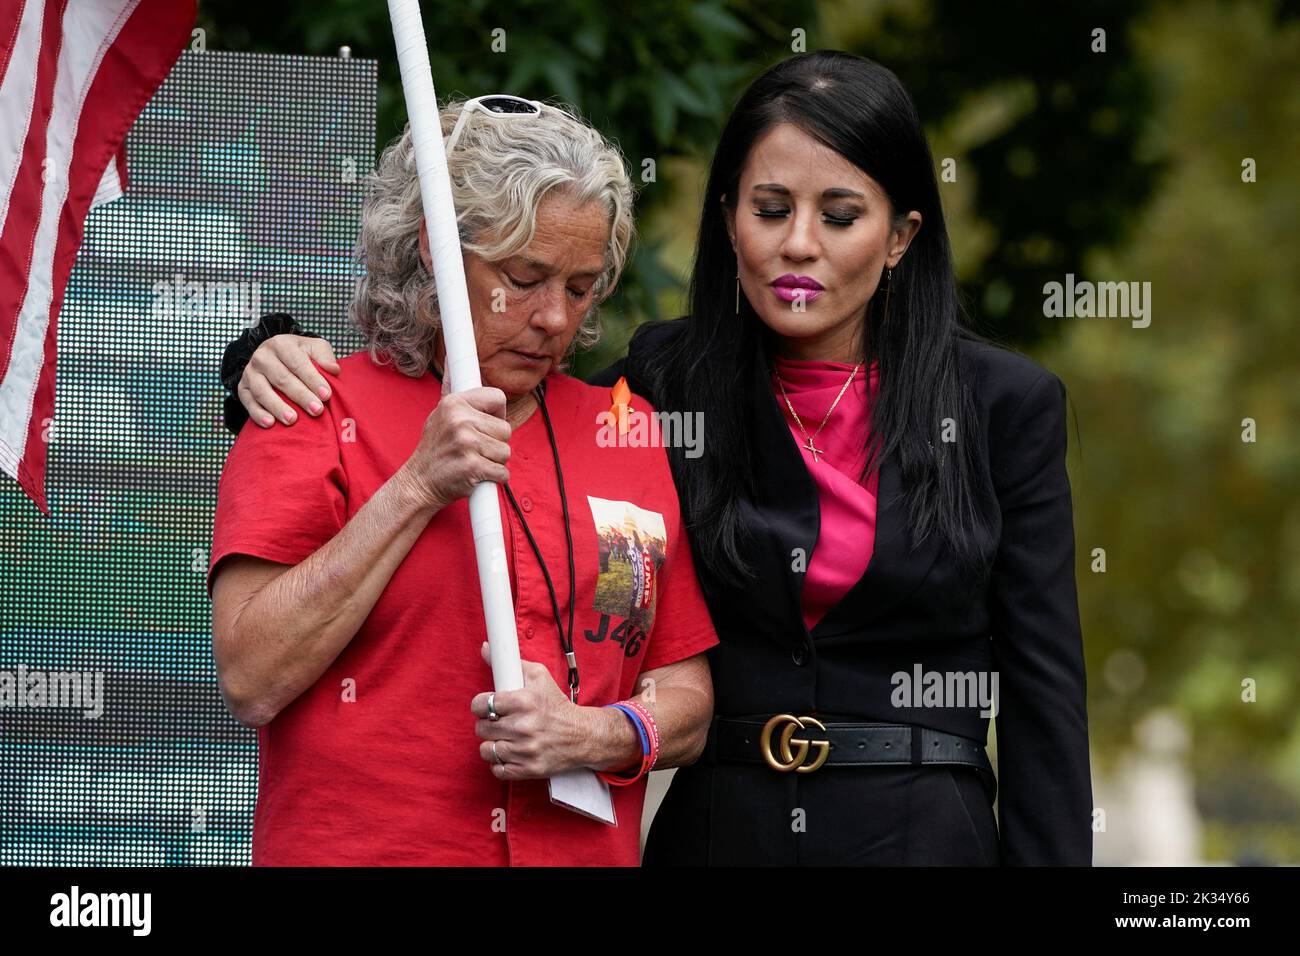 Micki Witthoeft, the mother of Ashli Babbitt who was shot and killed during the January 6th attack on the U.S. Capitol, and Cara Castronuova stand on stage during an event supporting the people charged with crimes related to the January 6th, 2021 attack on the U.S. Capitol, in Washington, U.S., September 24, 2022. REUTERS/Elizabeth Frantz Stock Photo